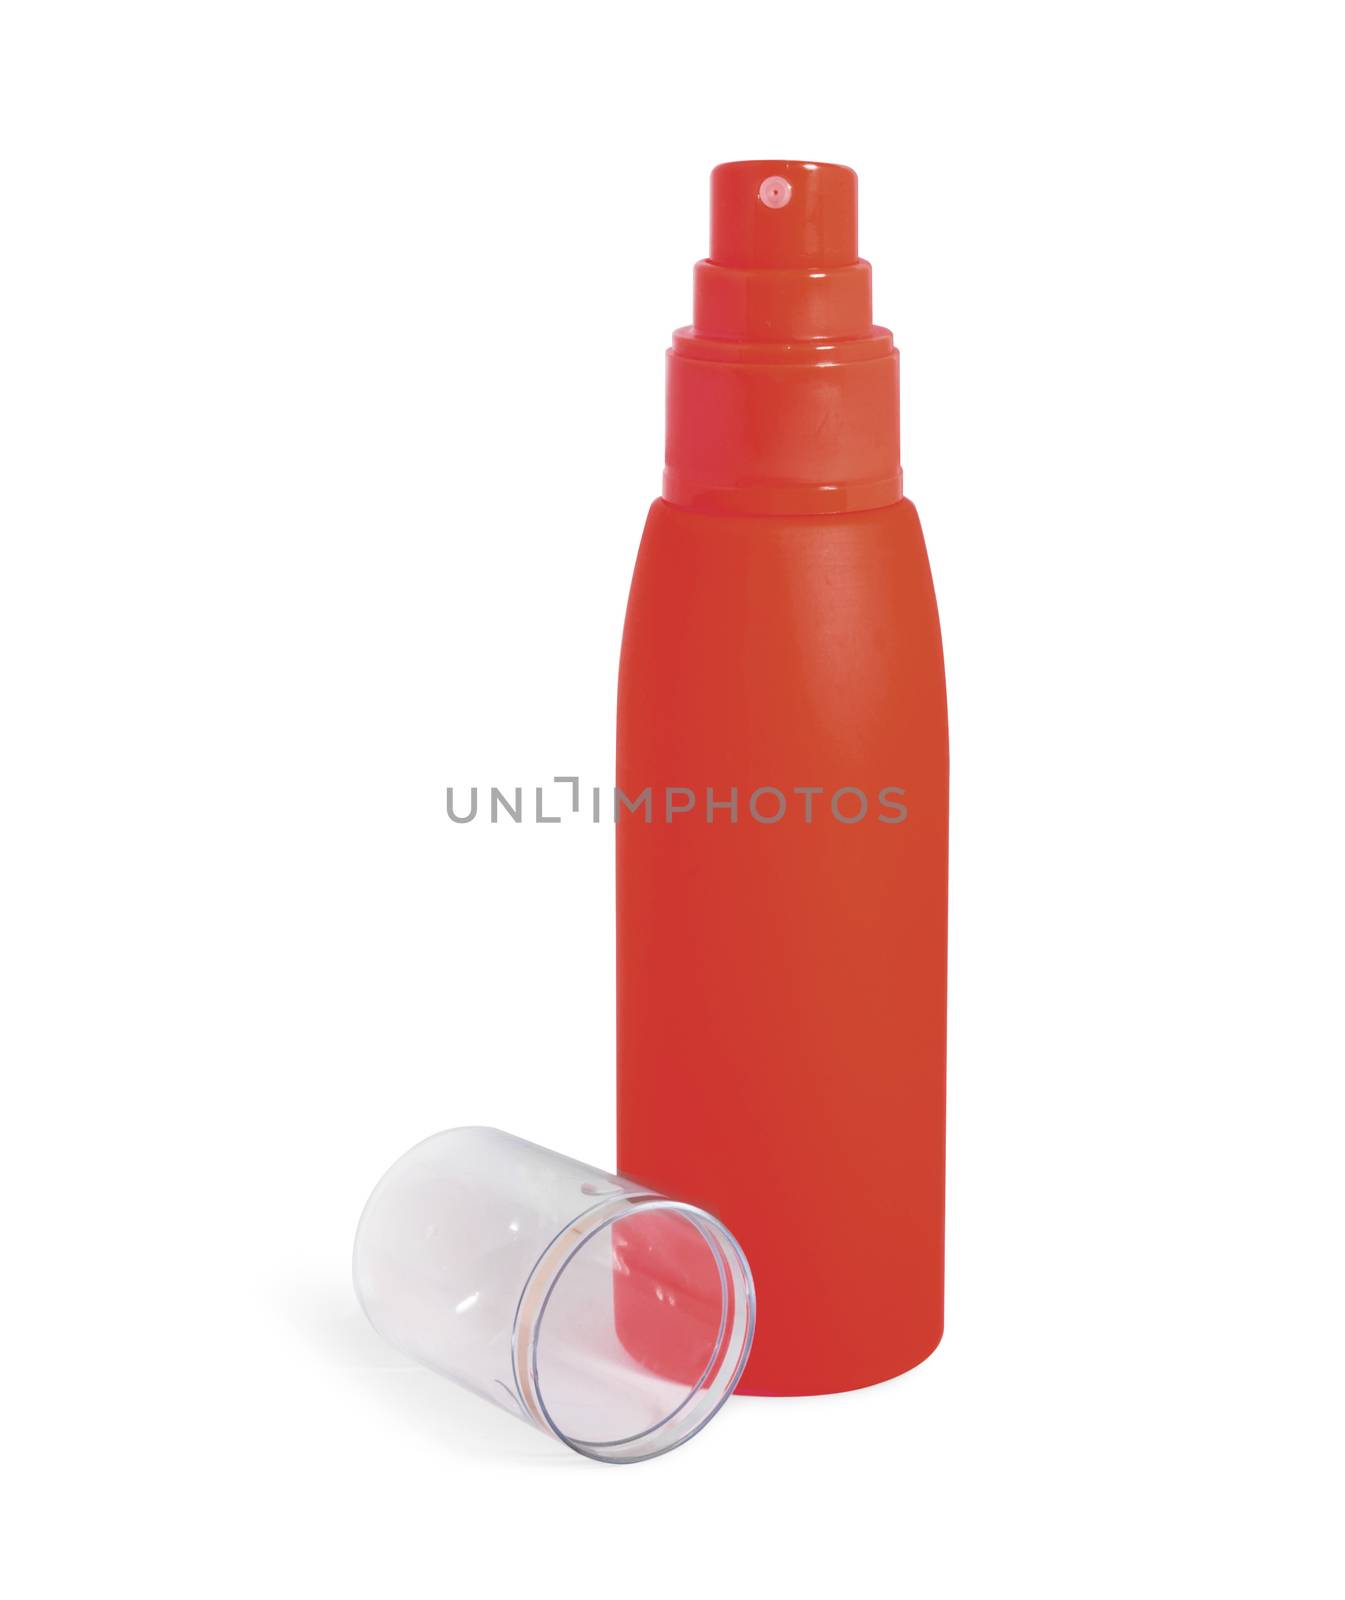 Red cosmetic cream bottle, spray opened isolated on white background